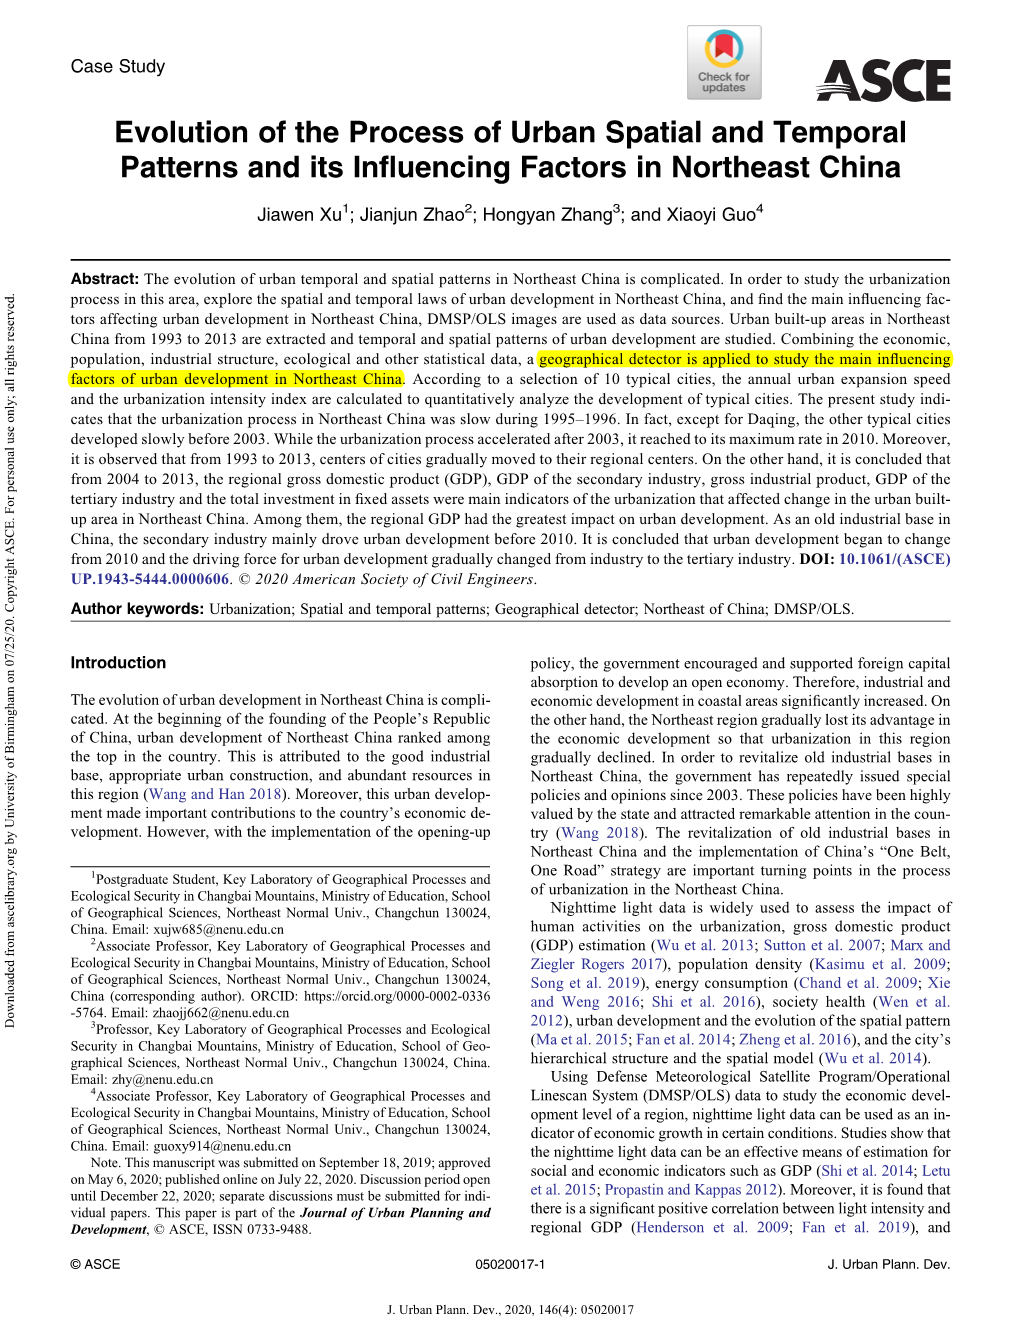 Evolution of the Process of Urban Spatial and Temporal Patterns and Its Influencing Factors in Northeast China